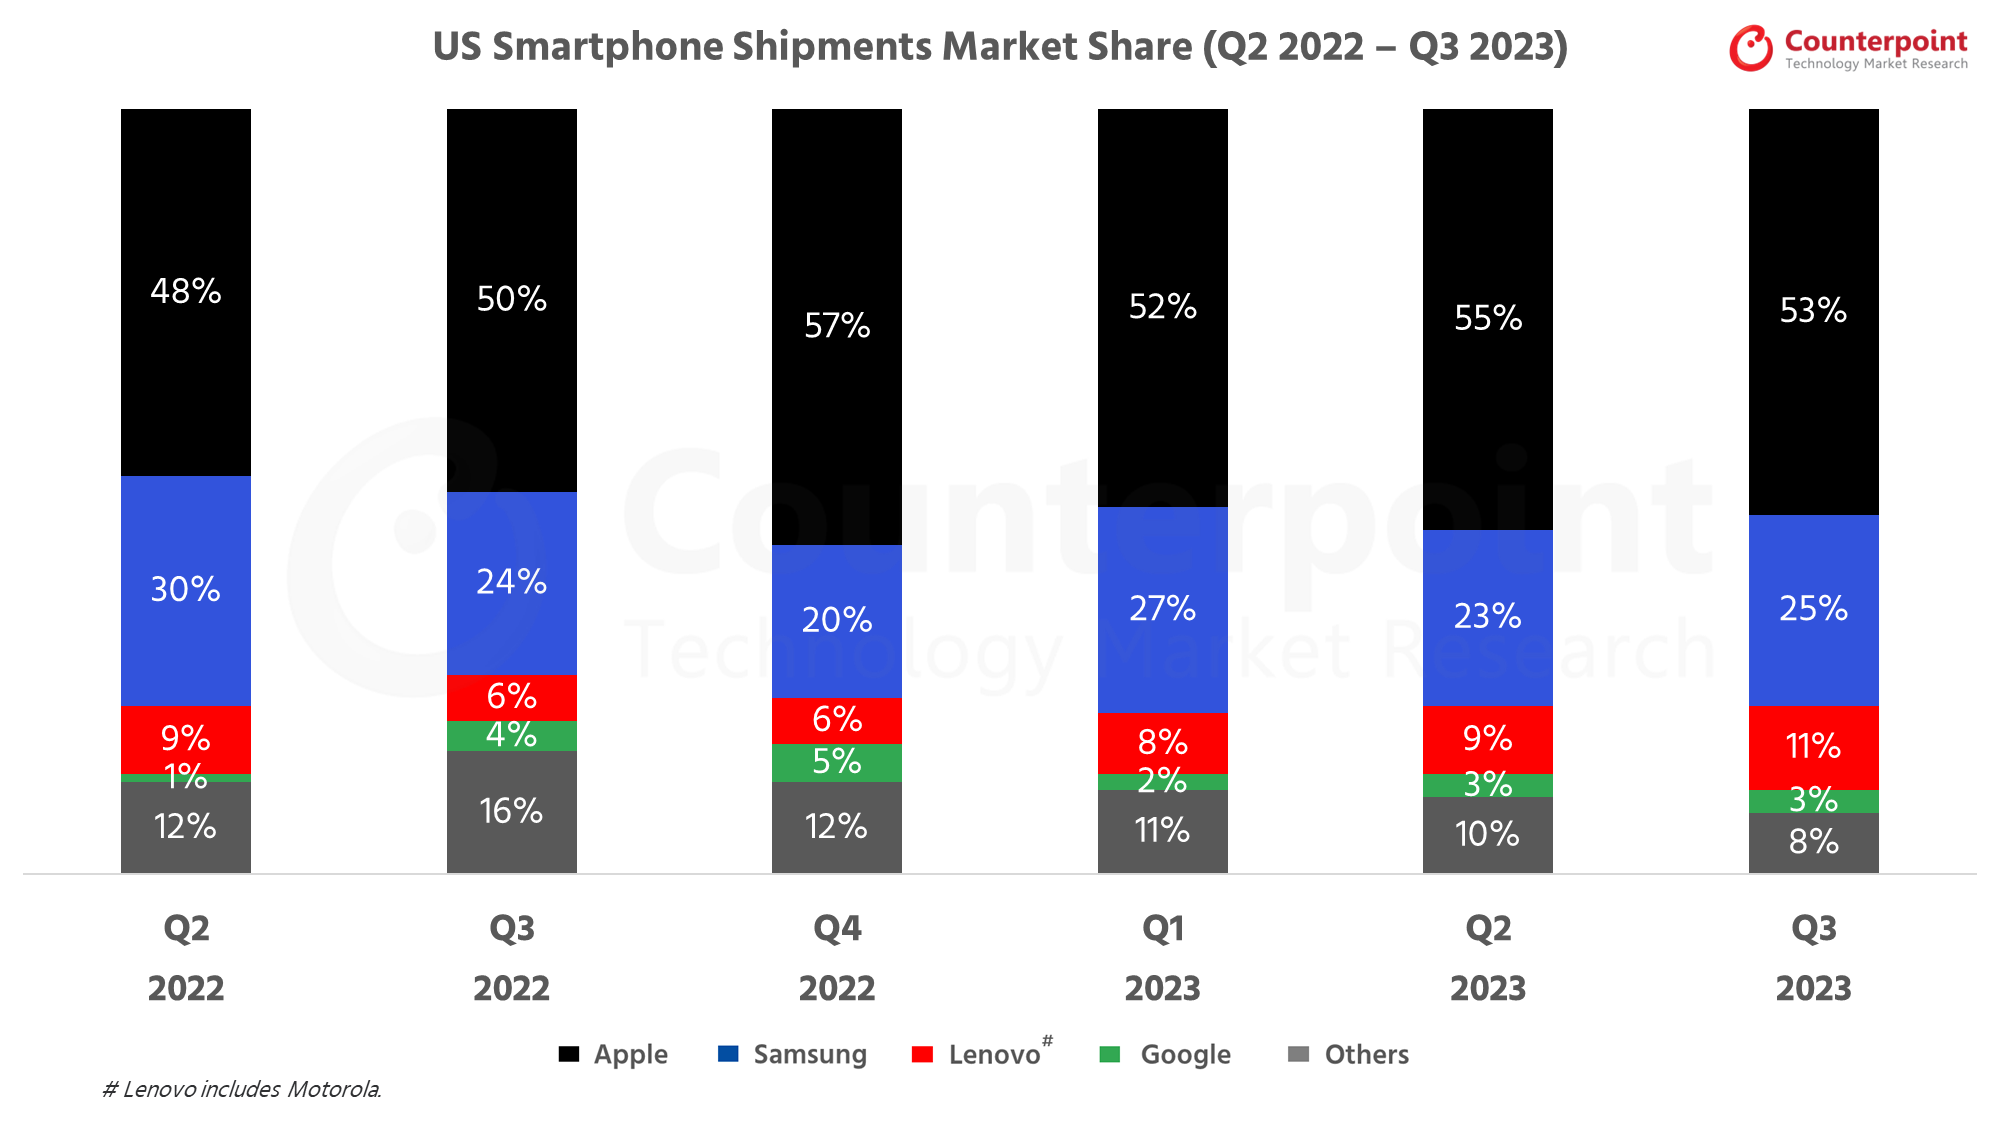 Counterpoint Research US Smartphone Market Share Q3 2023